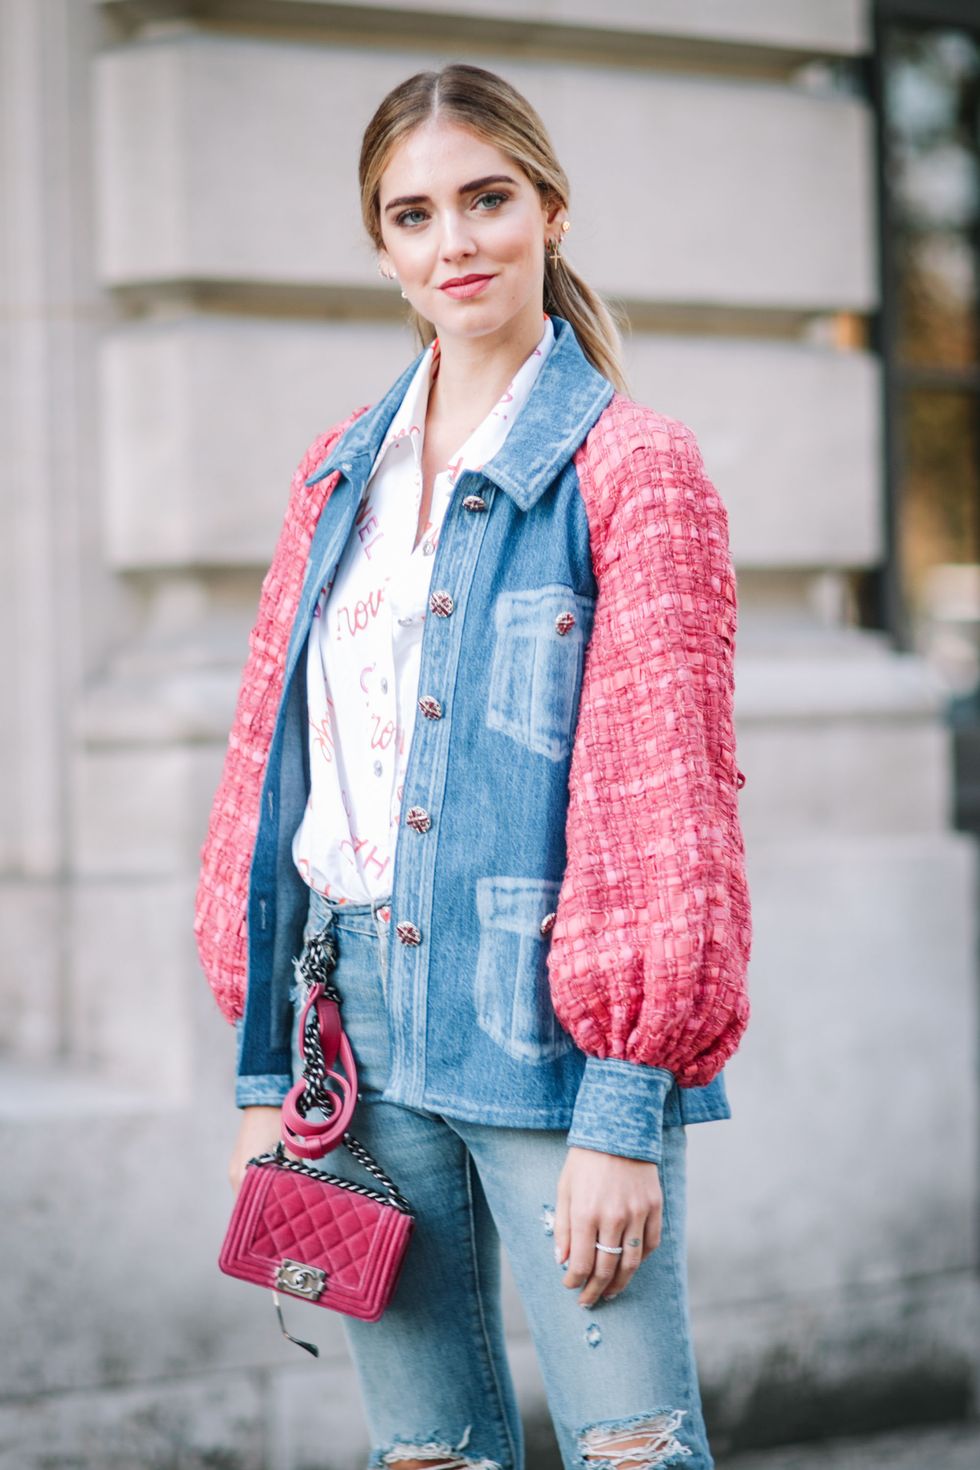 <p>Chiara Ferragni <span class="redactor-invisible-space">demonstrates that stylihn&nbsp;just a splash of the color is a chic way to dip into the trend.&nbsp;</span></p>